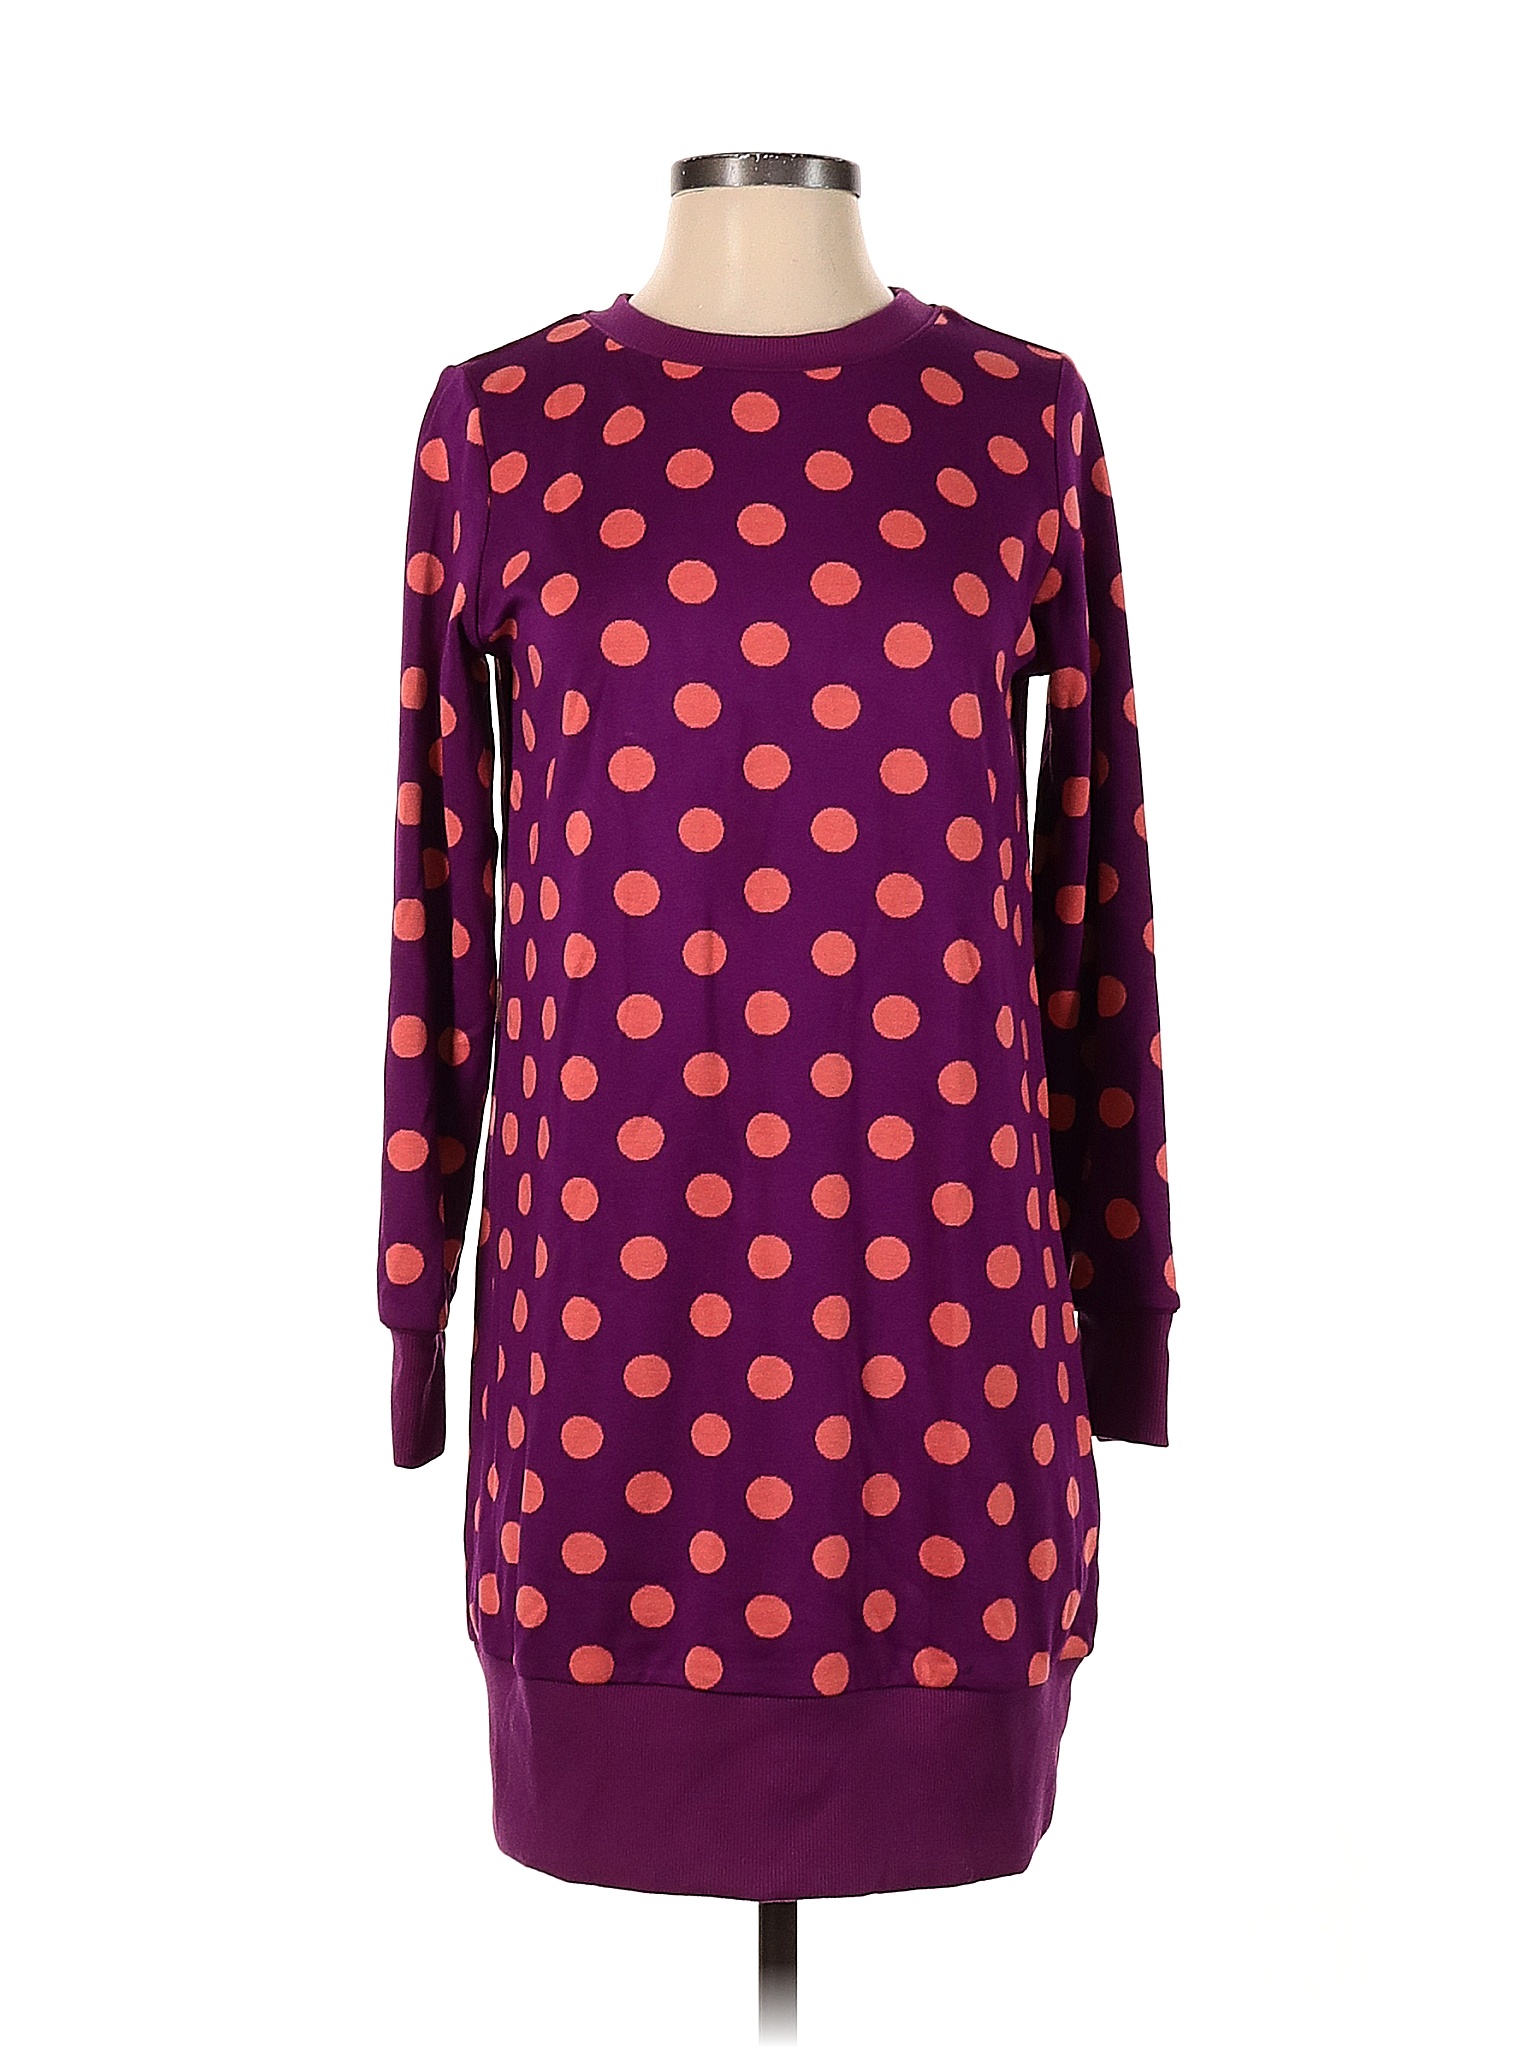 VICTOR GLEMAUD for Target Color Block Polka Dots Purple Casual Dress ...